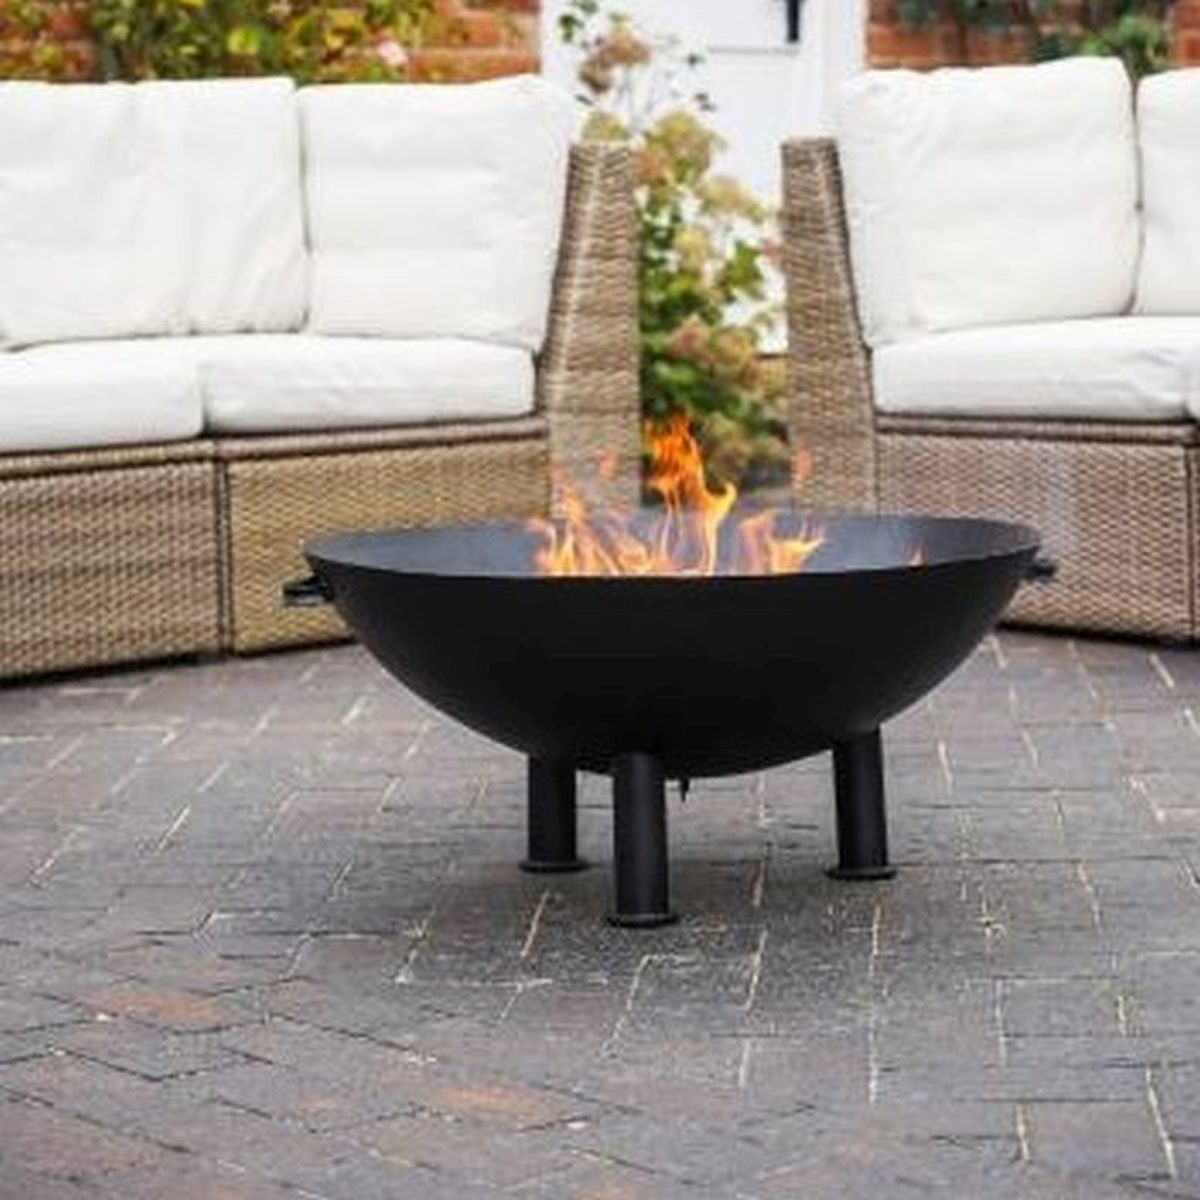 Outdoor Heritage Firebowl - Rust | Ivyline | Local Delivery Available